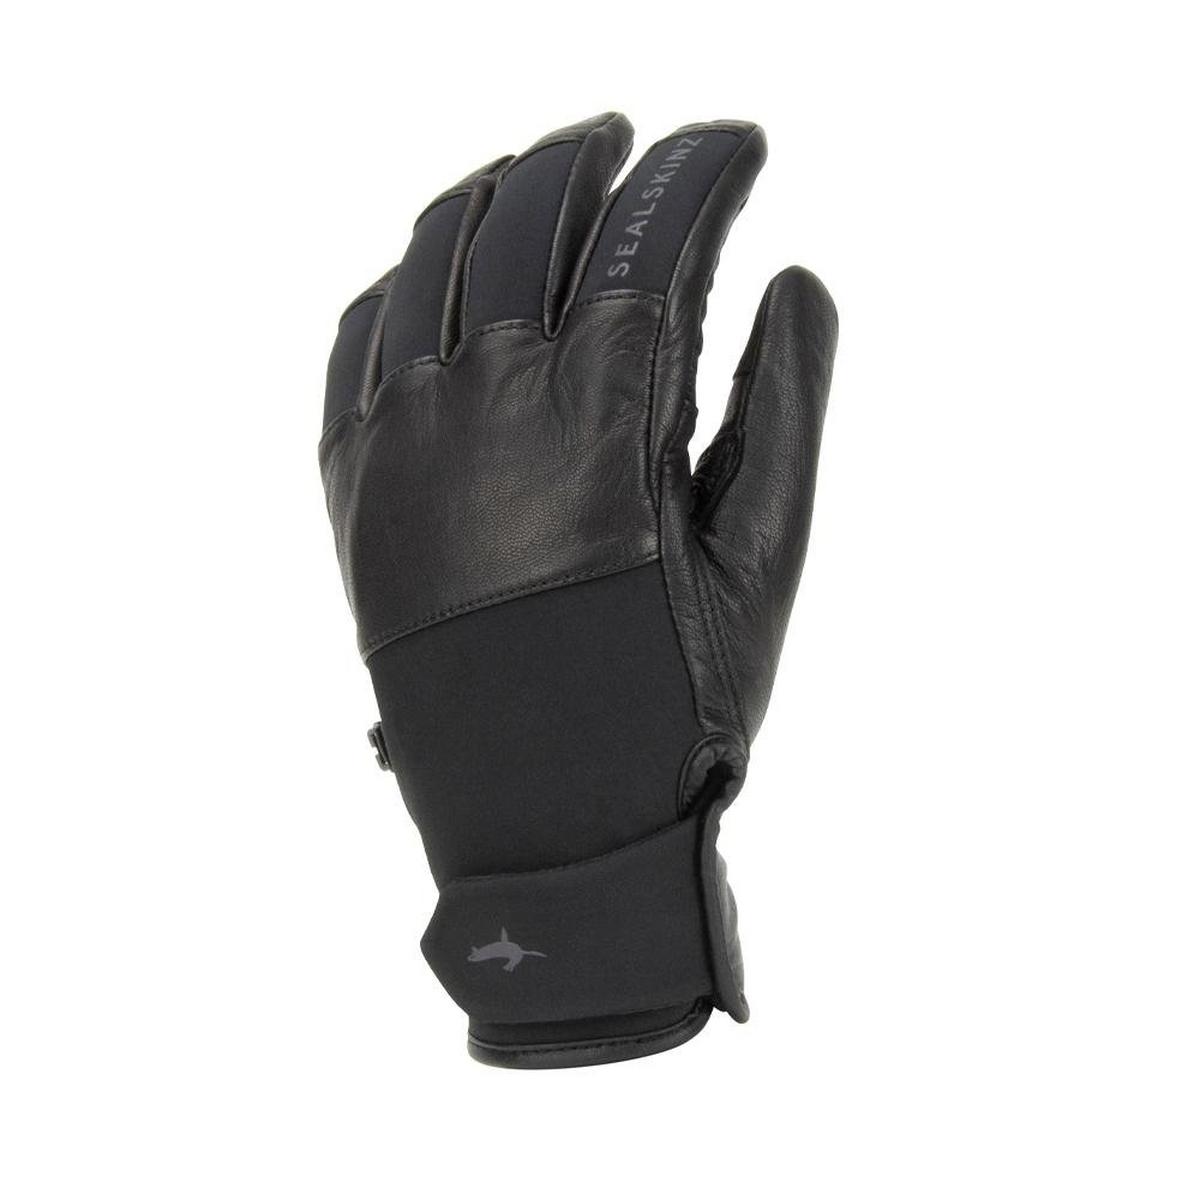 Sealskinz Waterproof Cold Weather Glove Fusion Control - Black